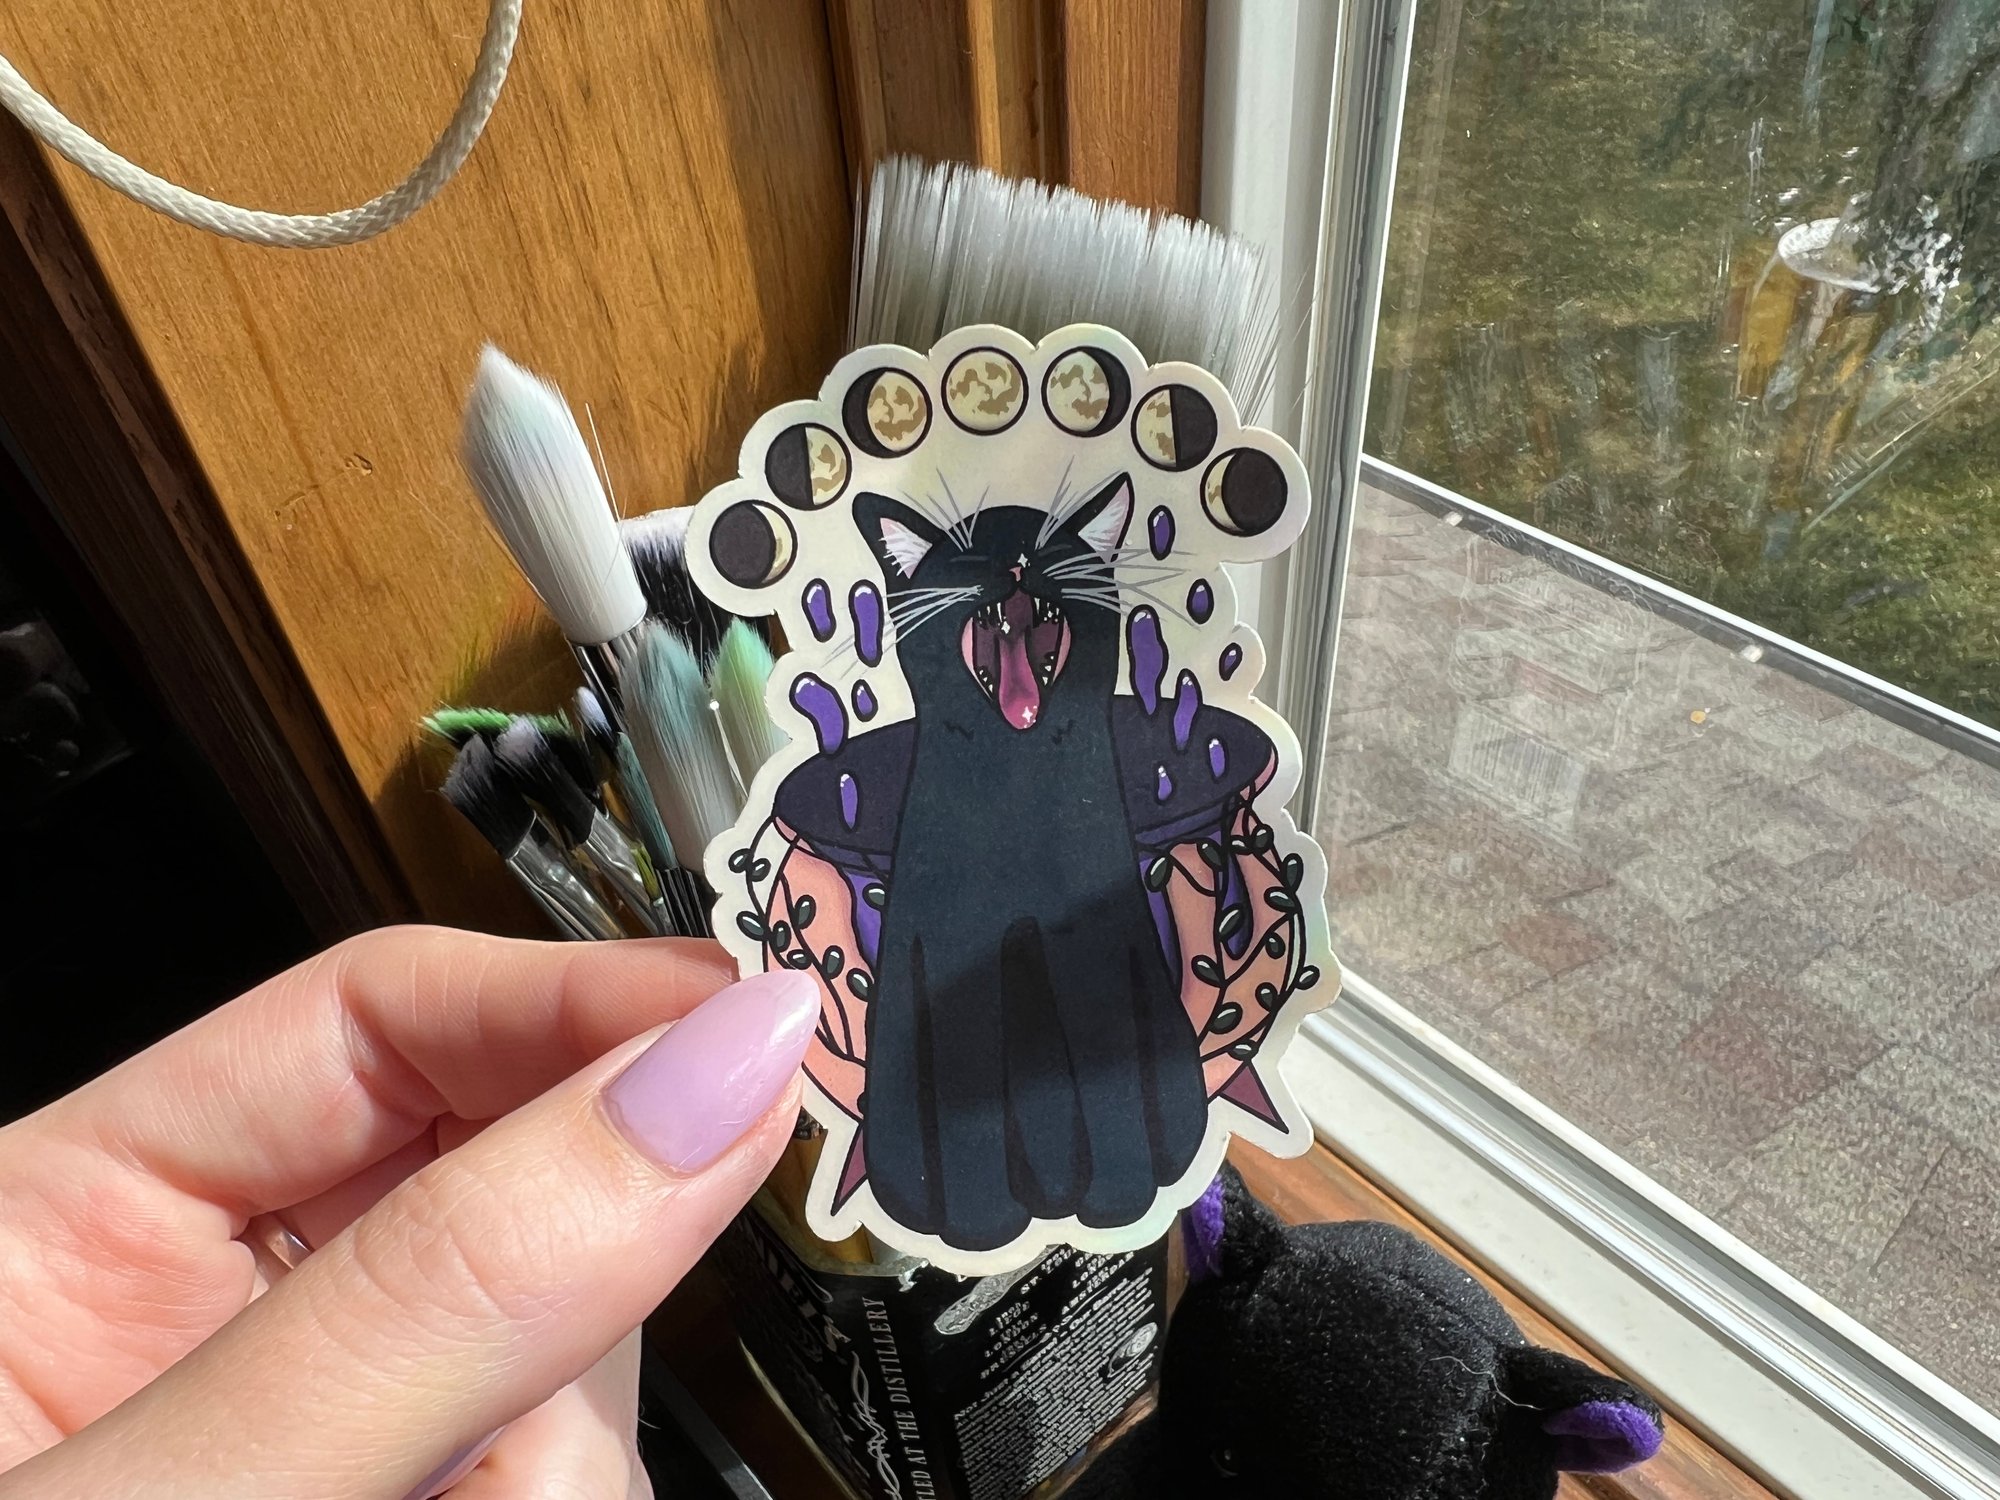 Witch Moon Sticker, Witchy Stickers For Cars